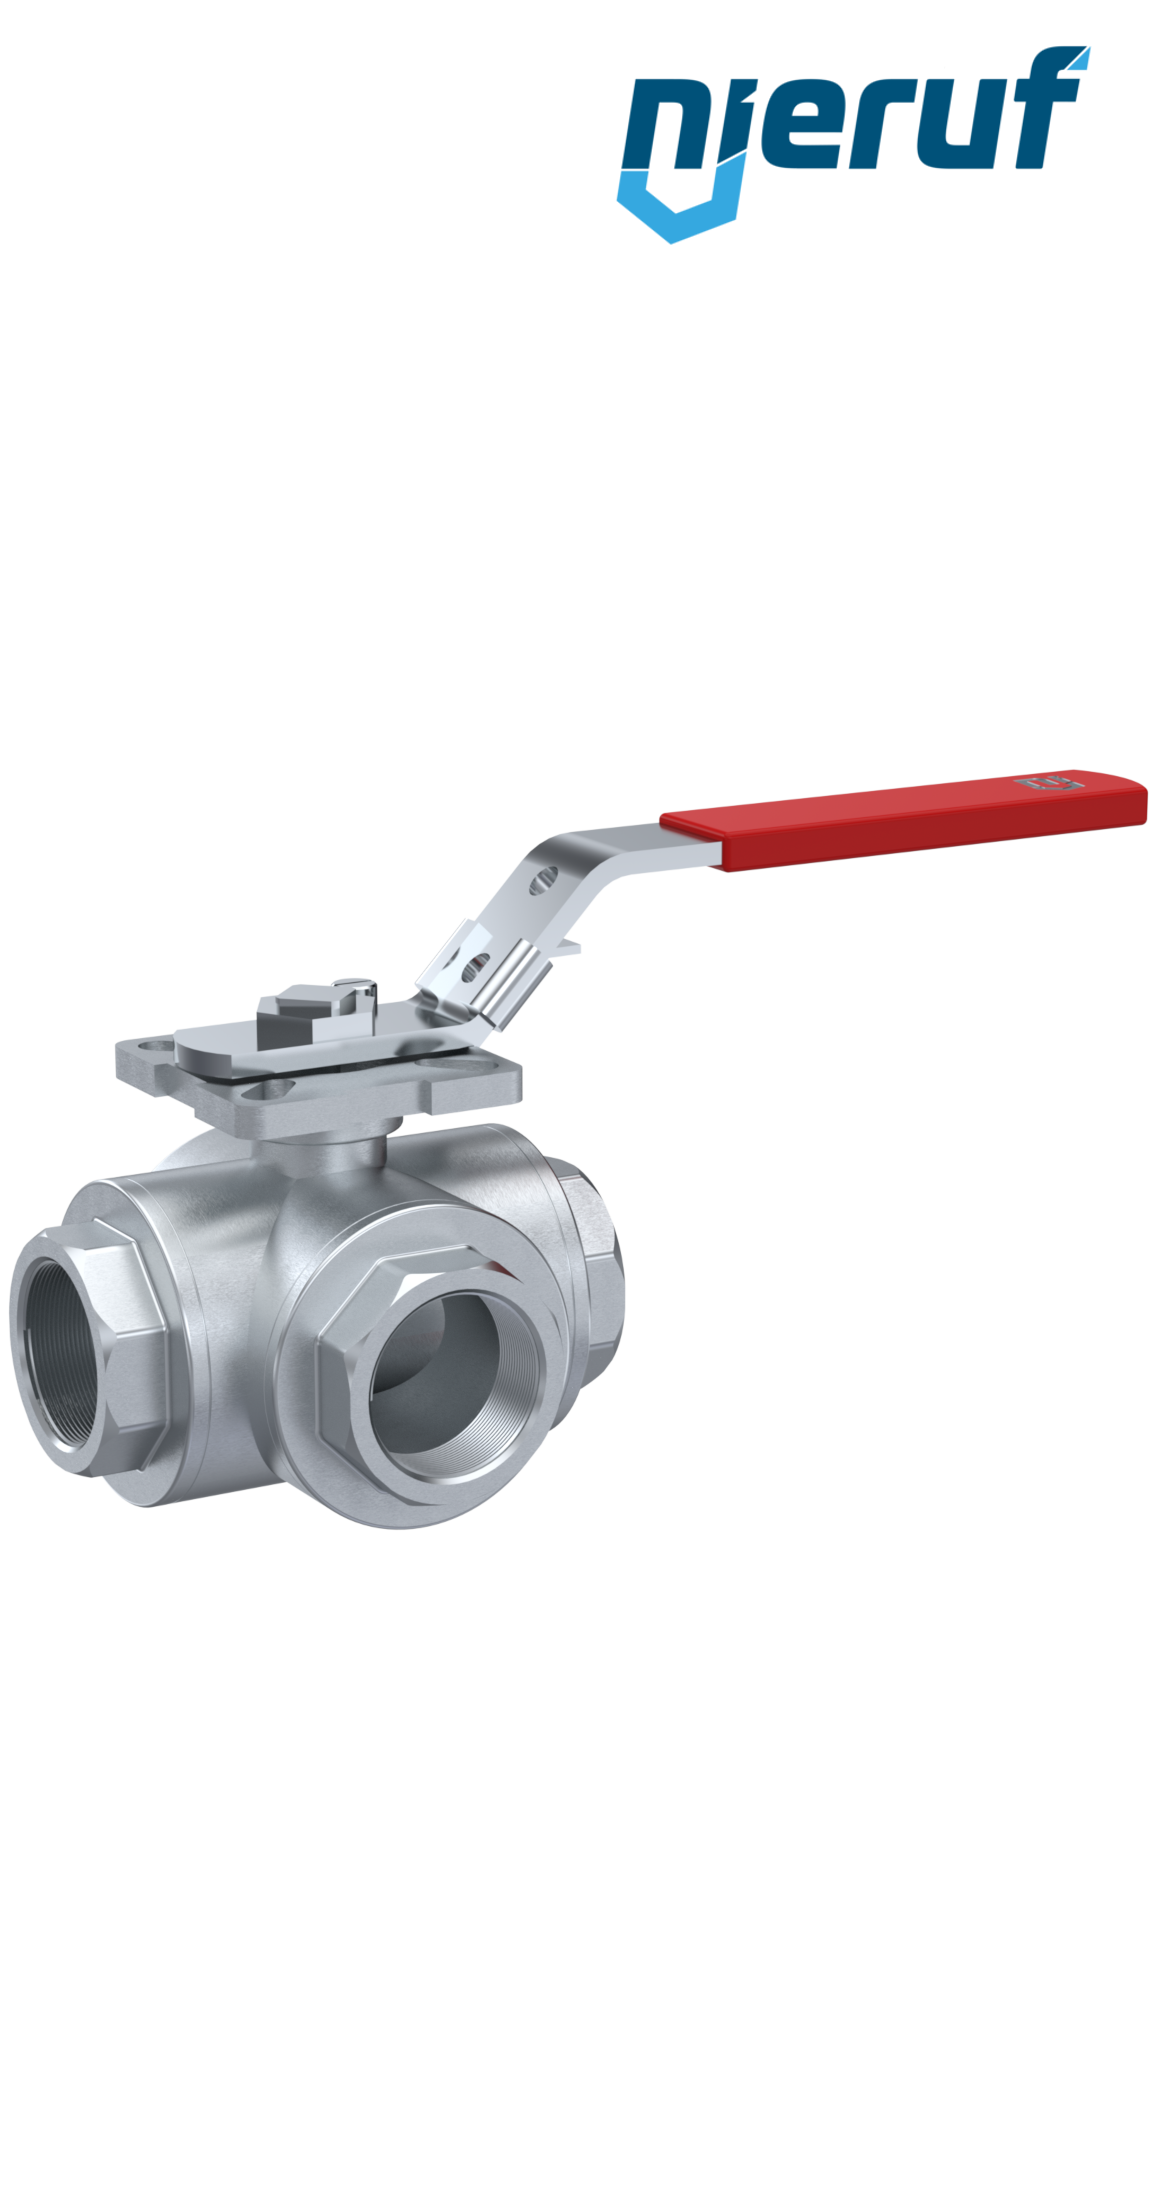 3-way ball valve DN40 - 1 1/2" inch GK09 stainless steel L drilling